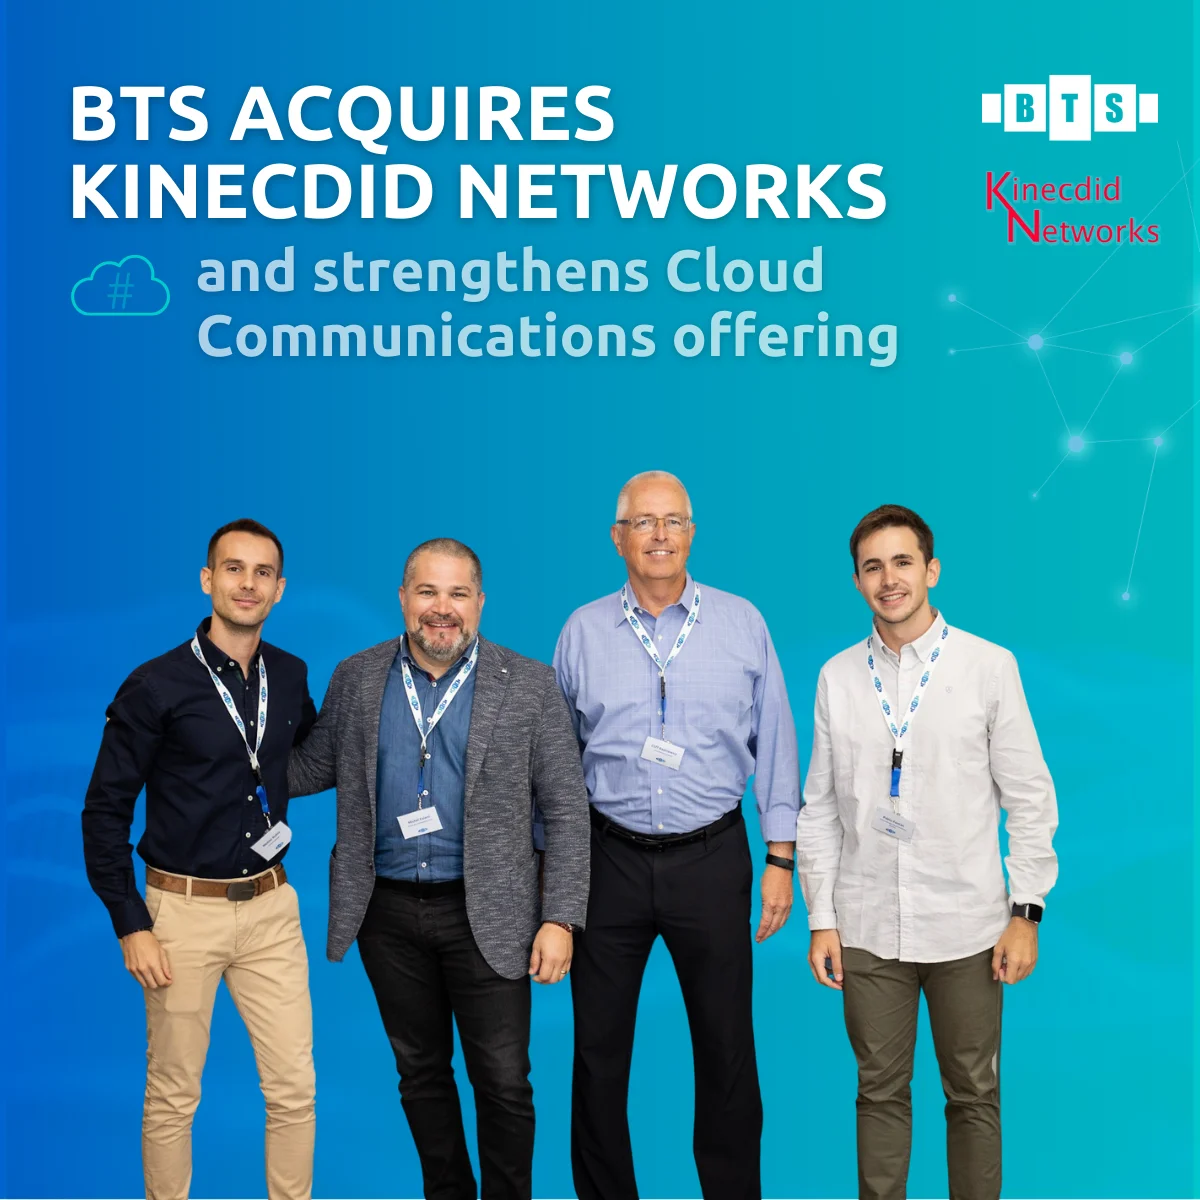 BTS Strengthens Cloud Communications Offering through Acquisition of Kinecdid Networks. image